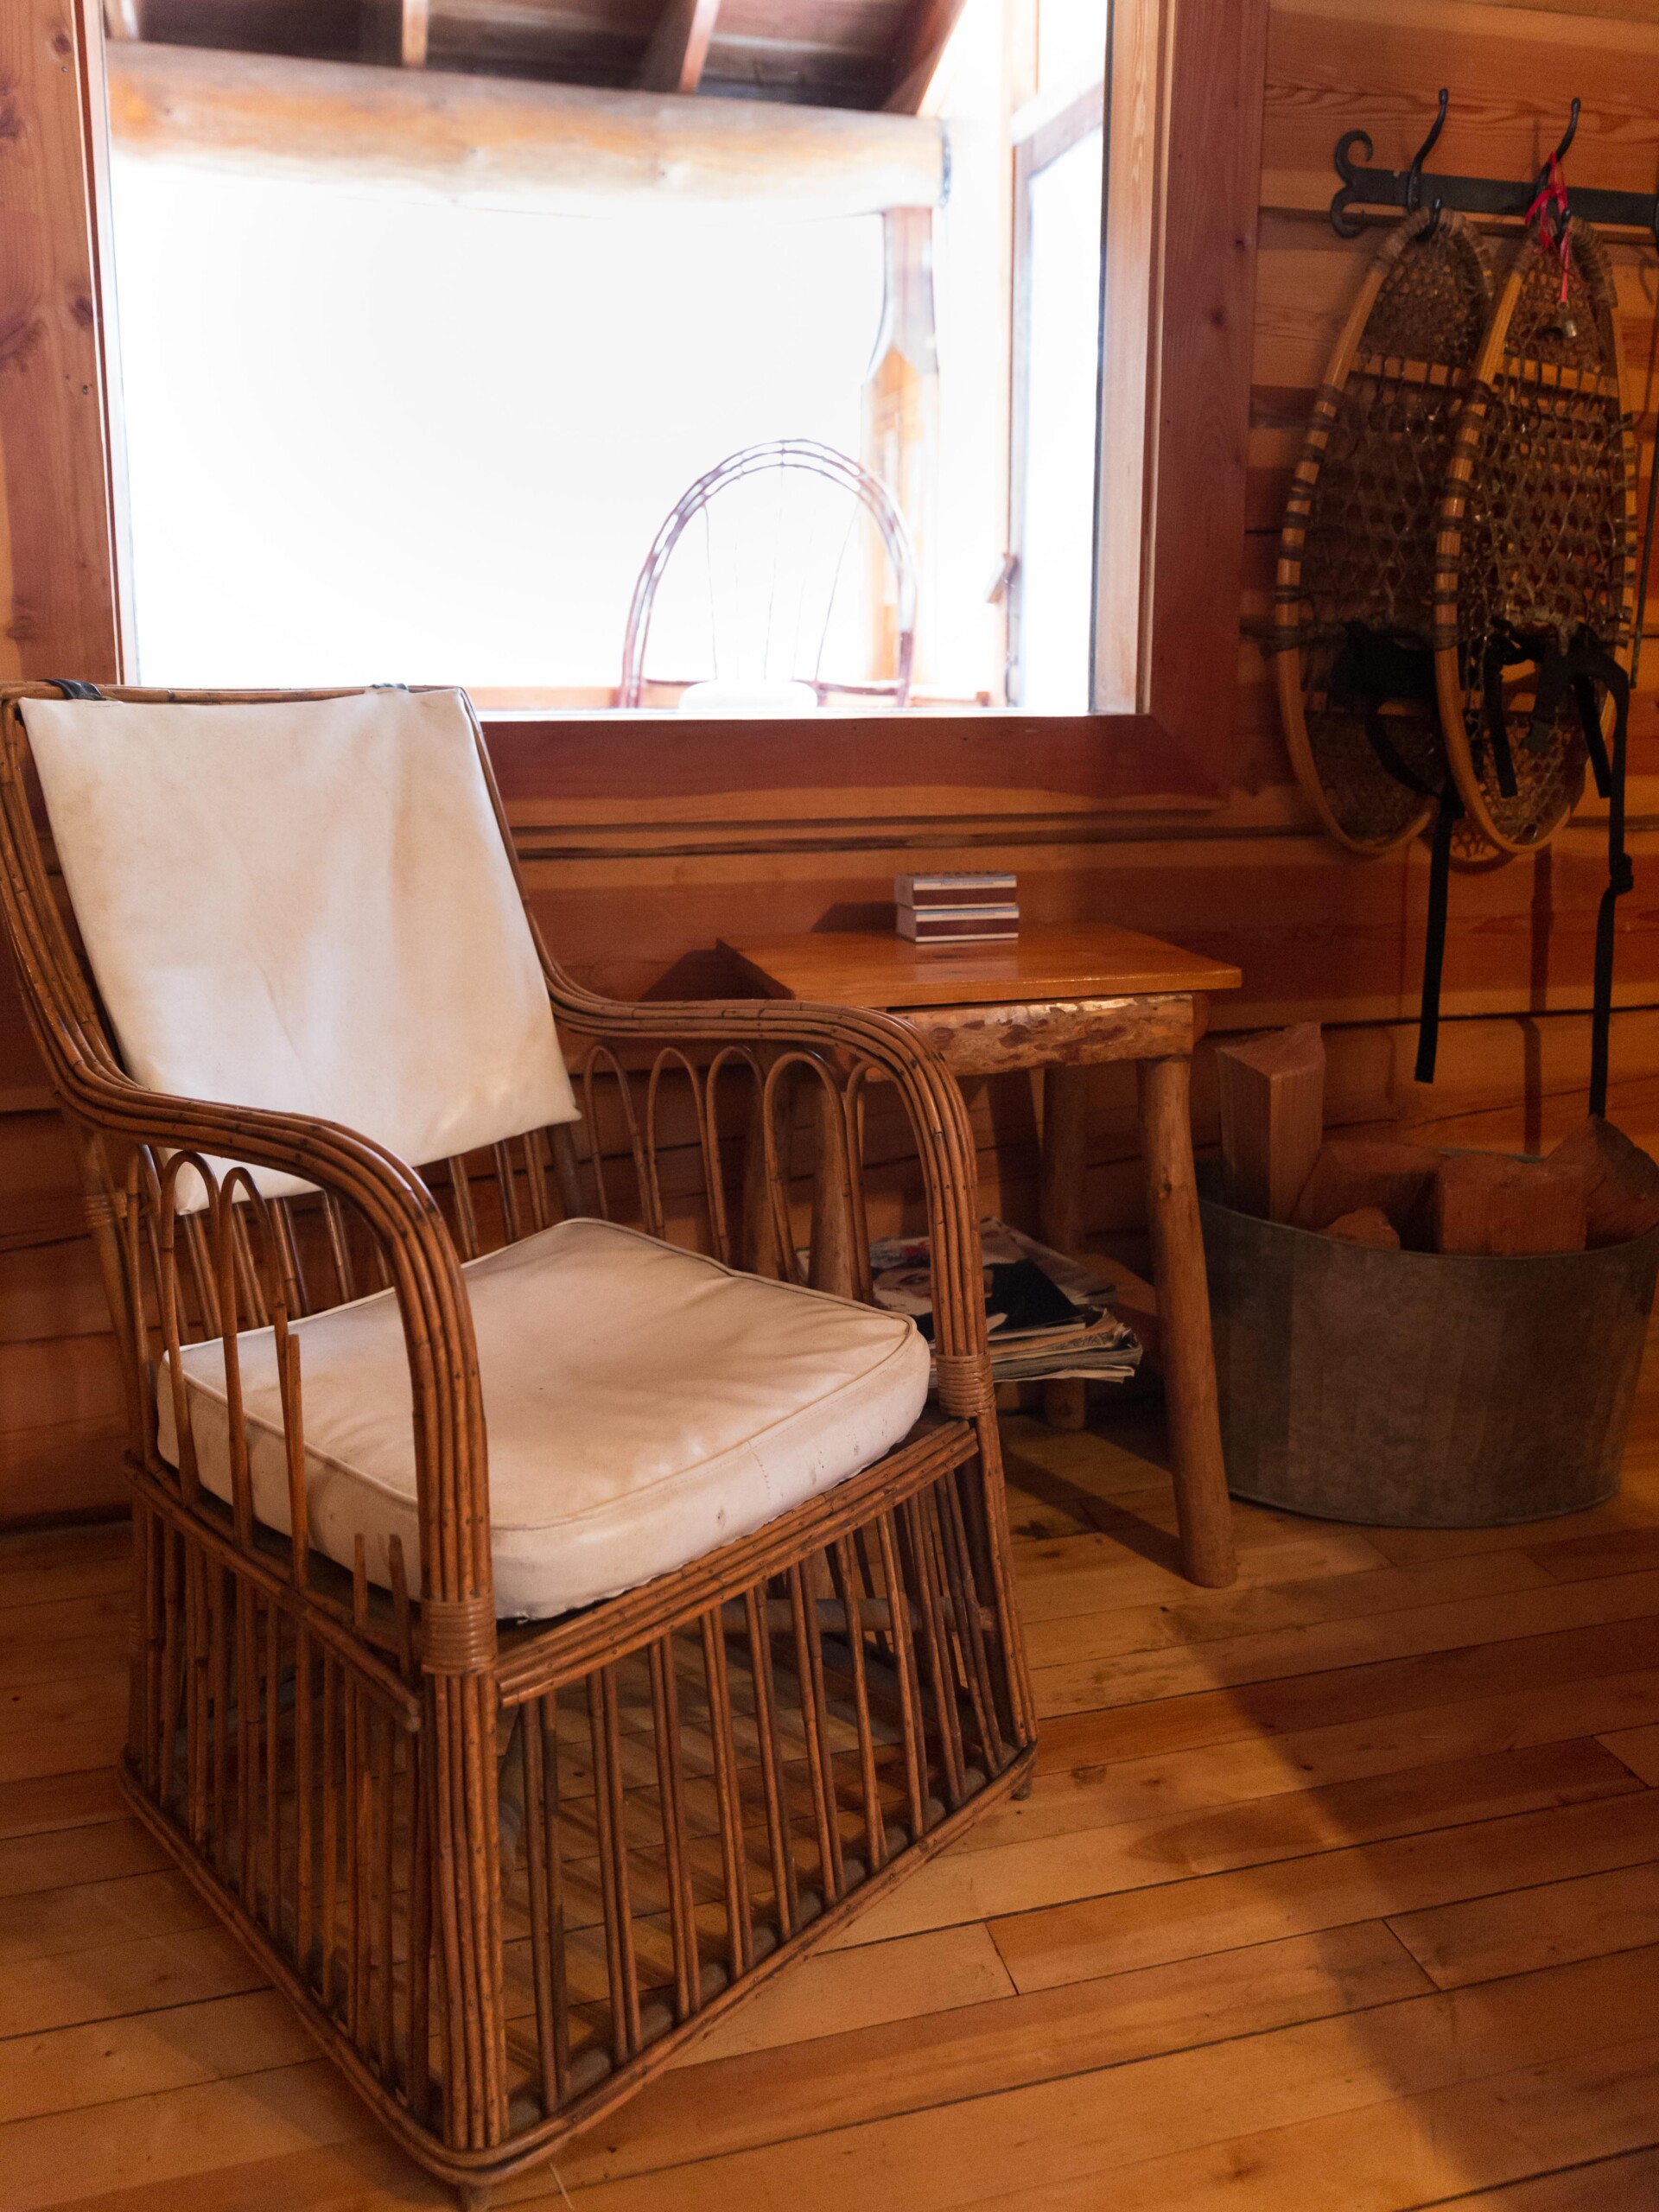 A wicker chair and snowshoes.